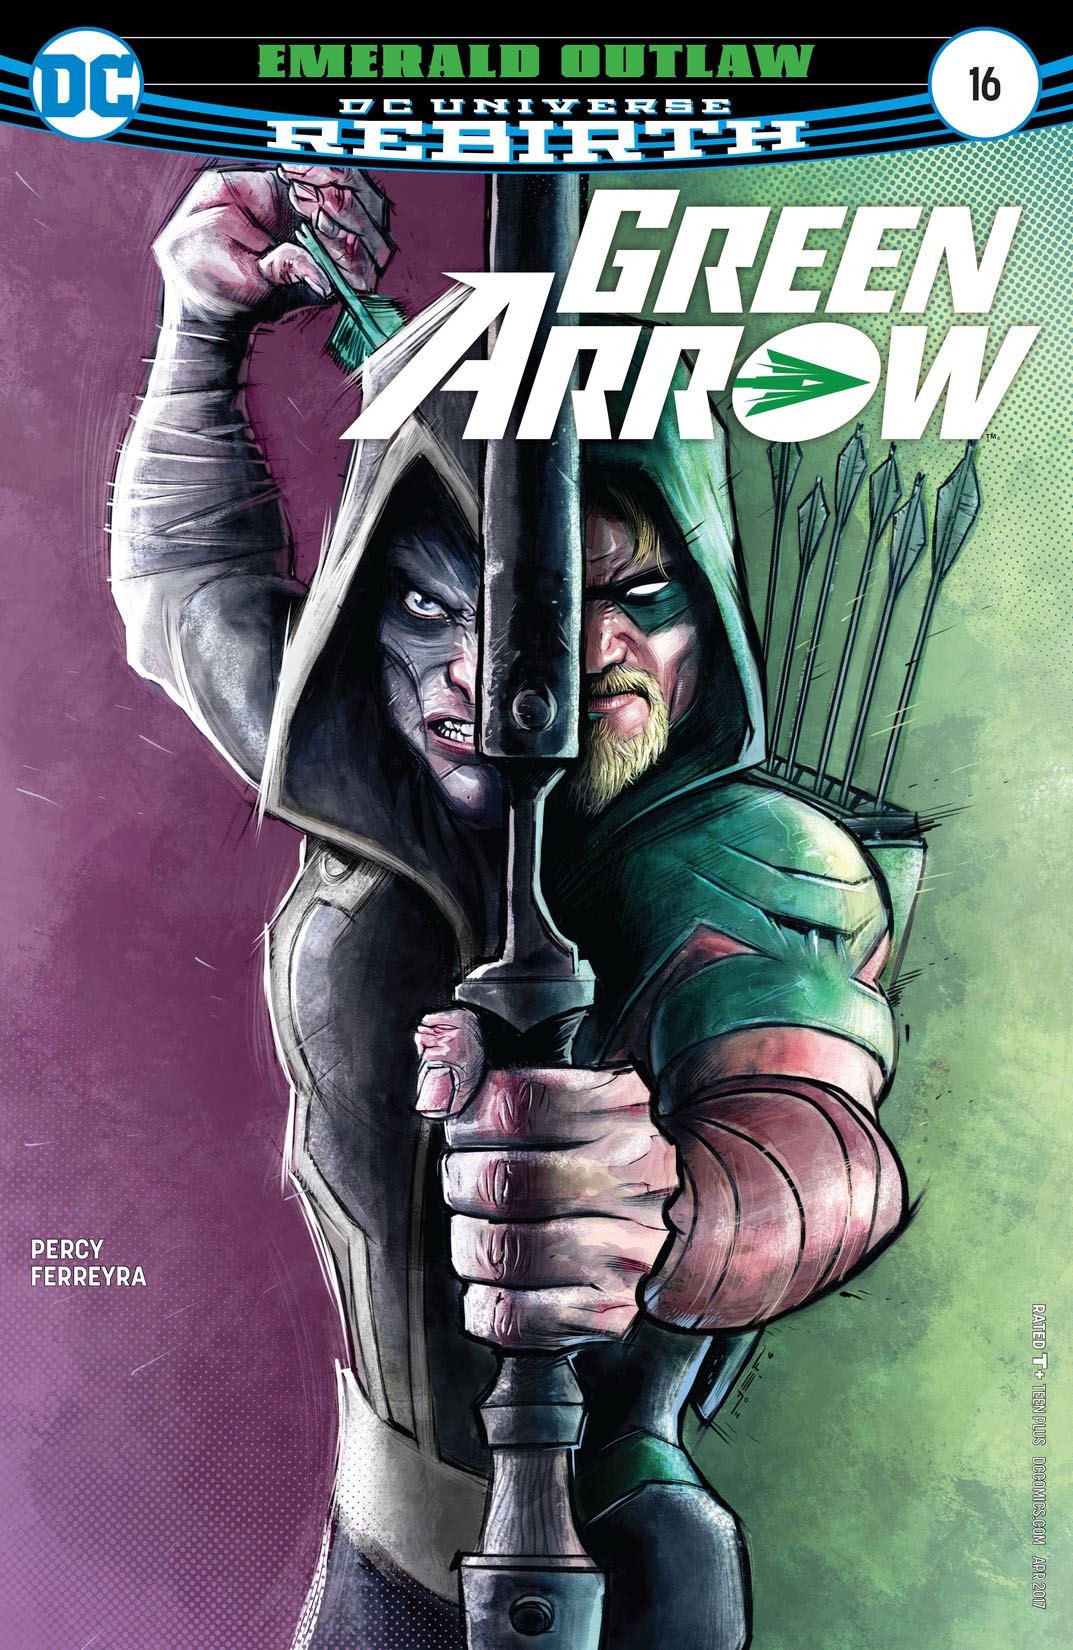 Green Arrow (2016-) #16 preview images